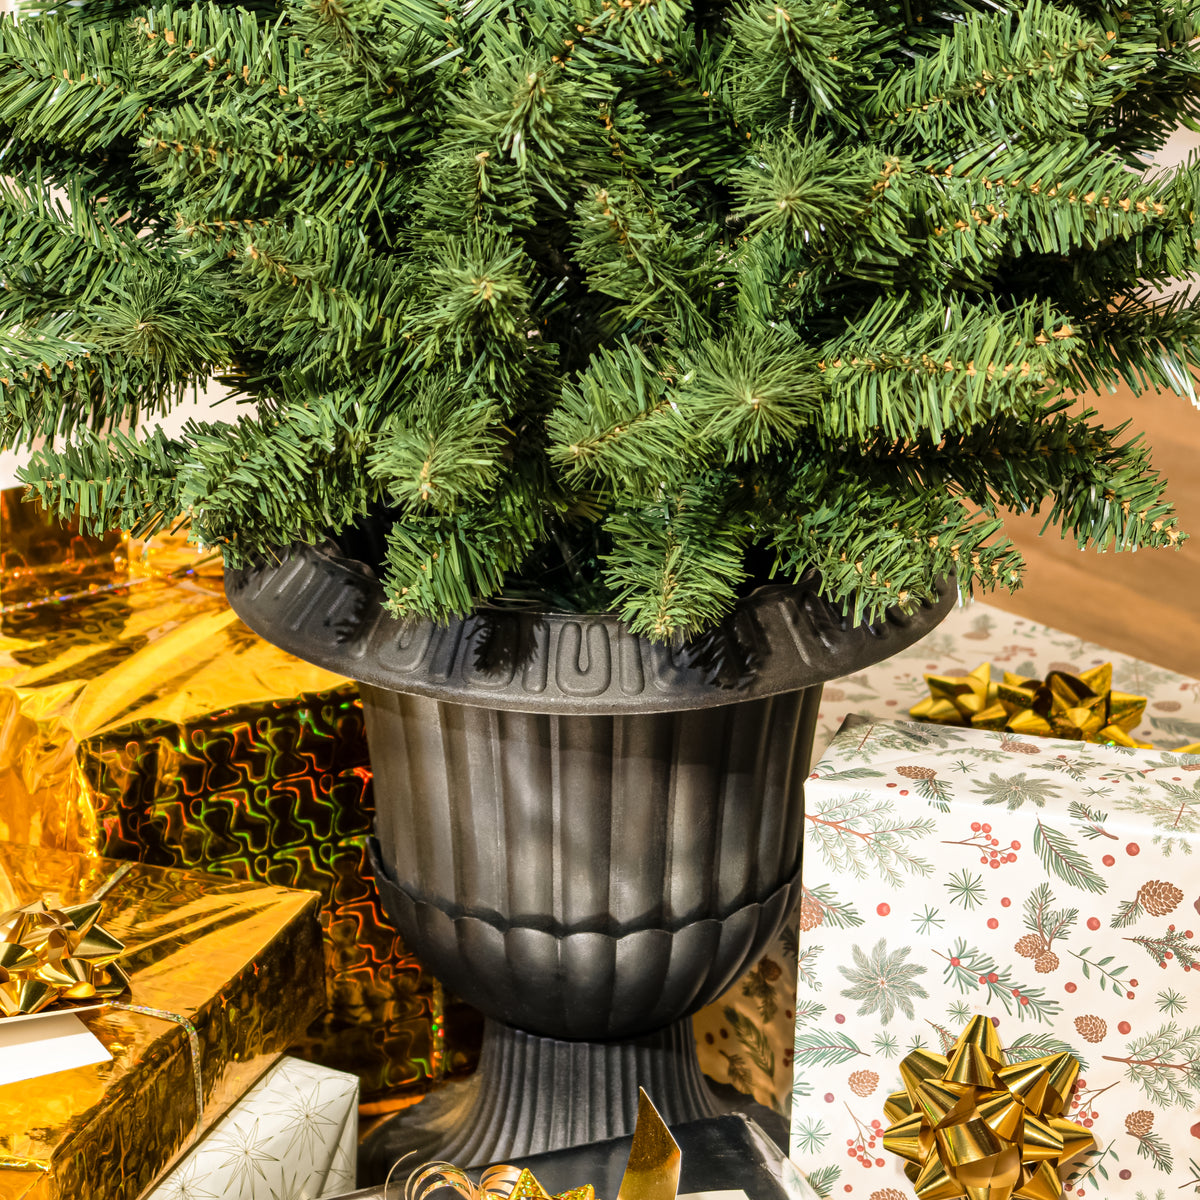 4ft - 5ft Potted Belgravia Spruce PE Artificial Christmas Tree